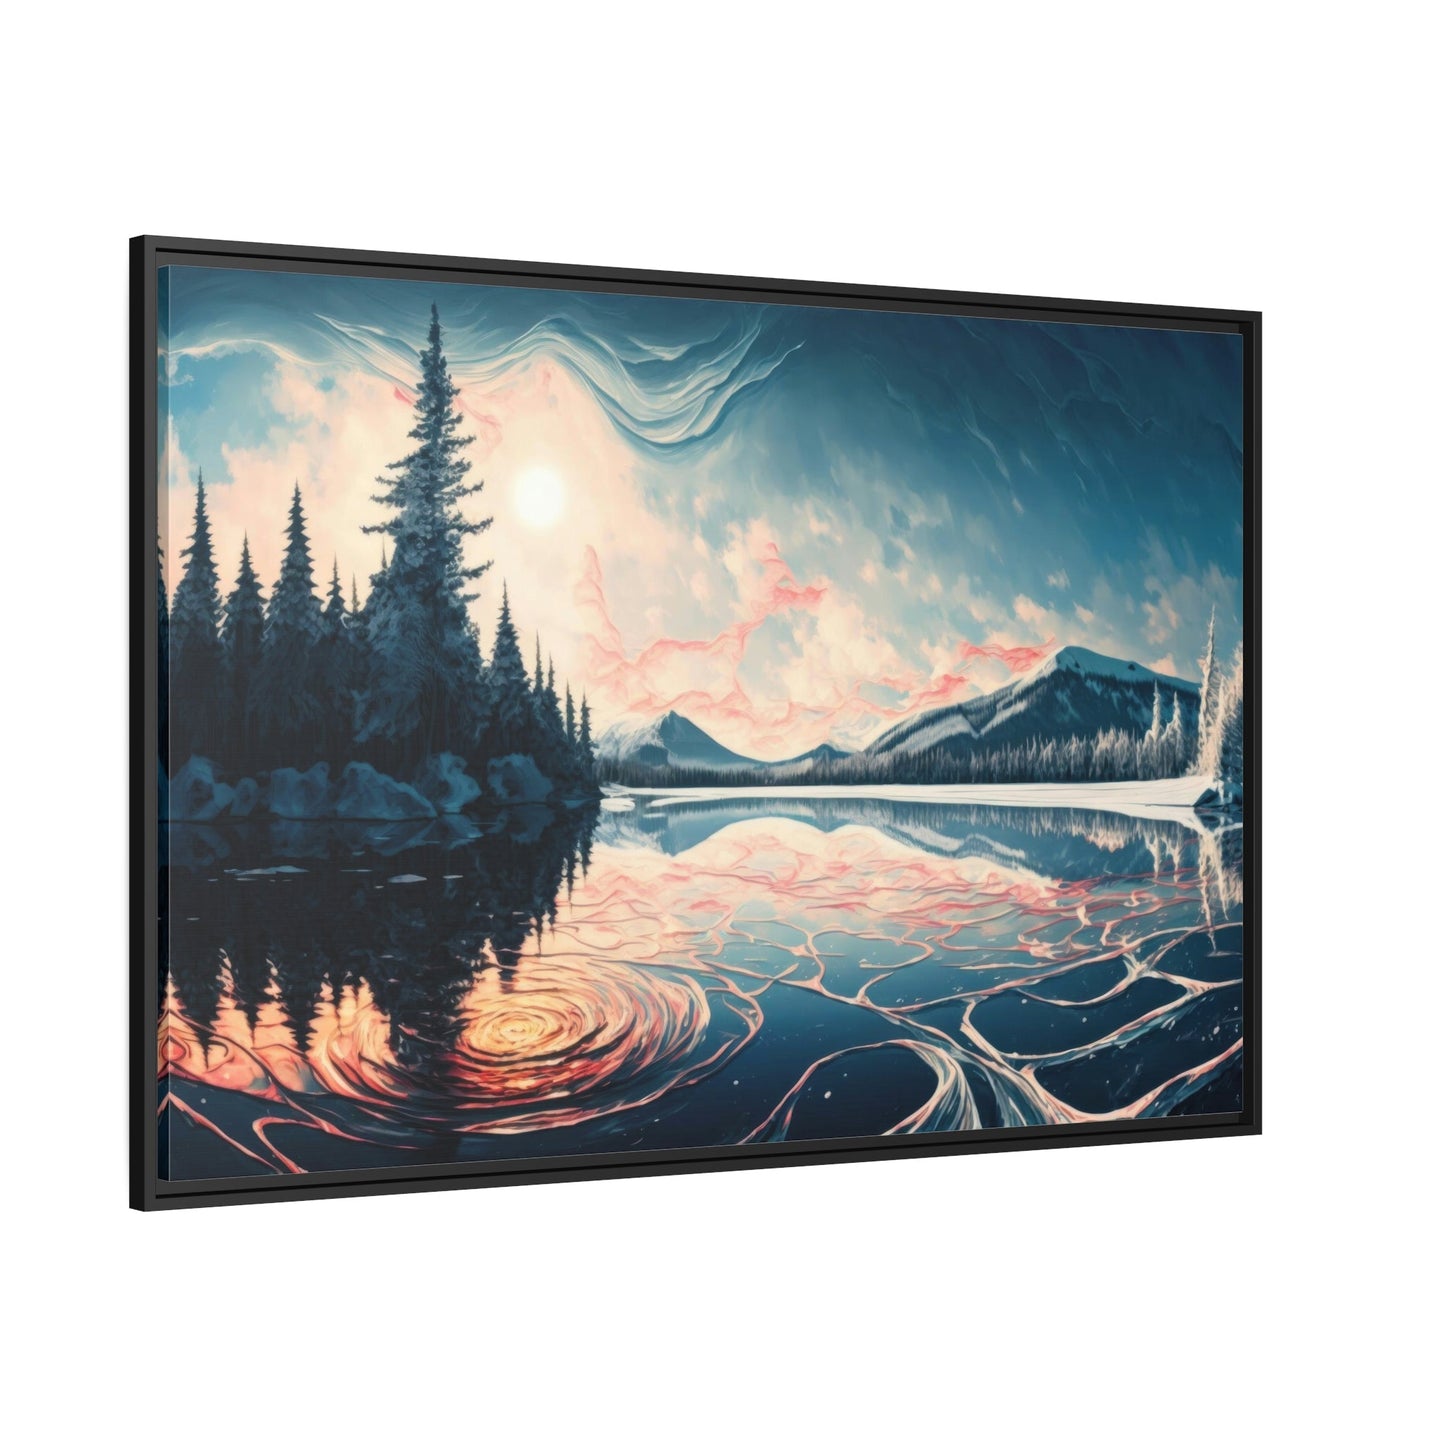 Lakeside Memories: Print on Canvas & Poster of a Stunning Lake View